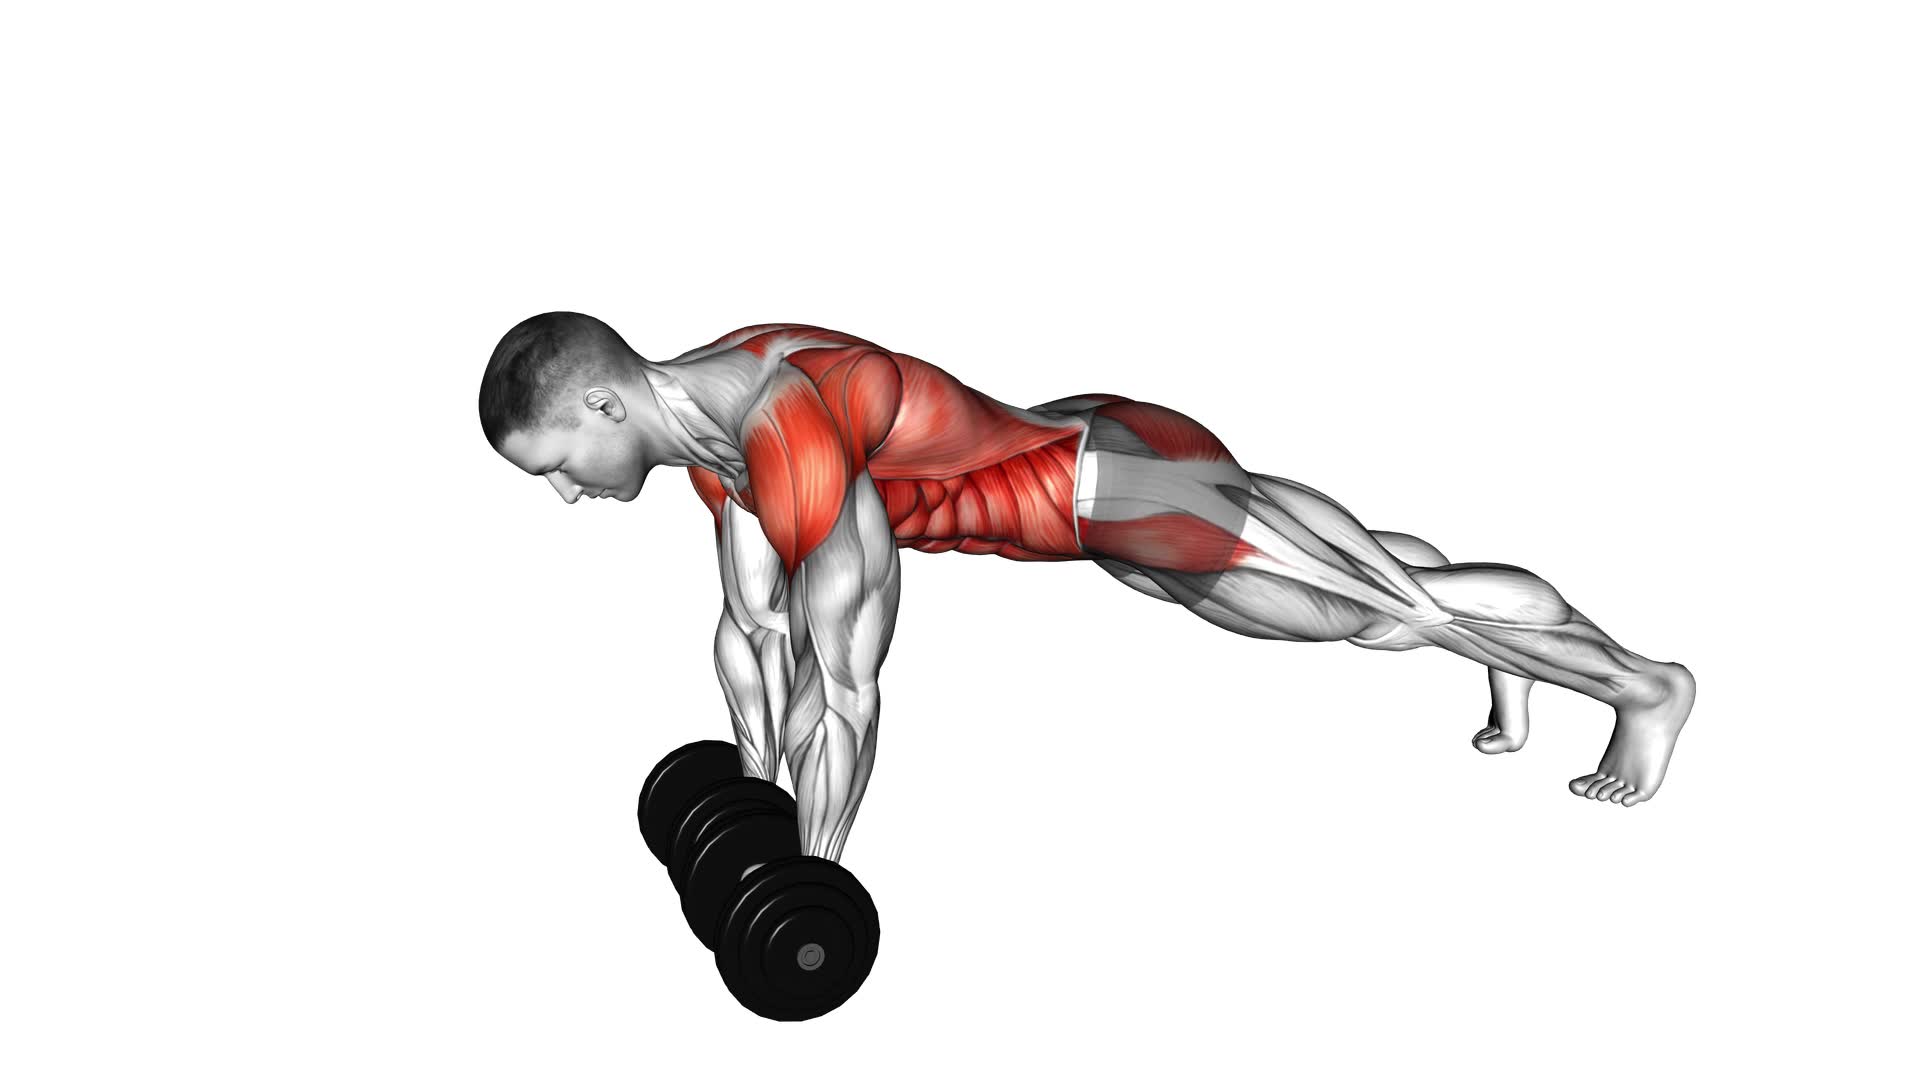 Dumbbell Front Plank Arm Raise - Video Exercise Guide & Tips